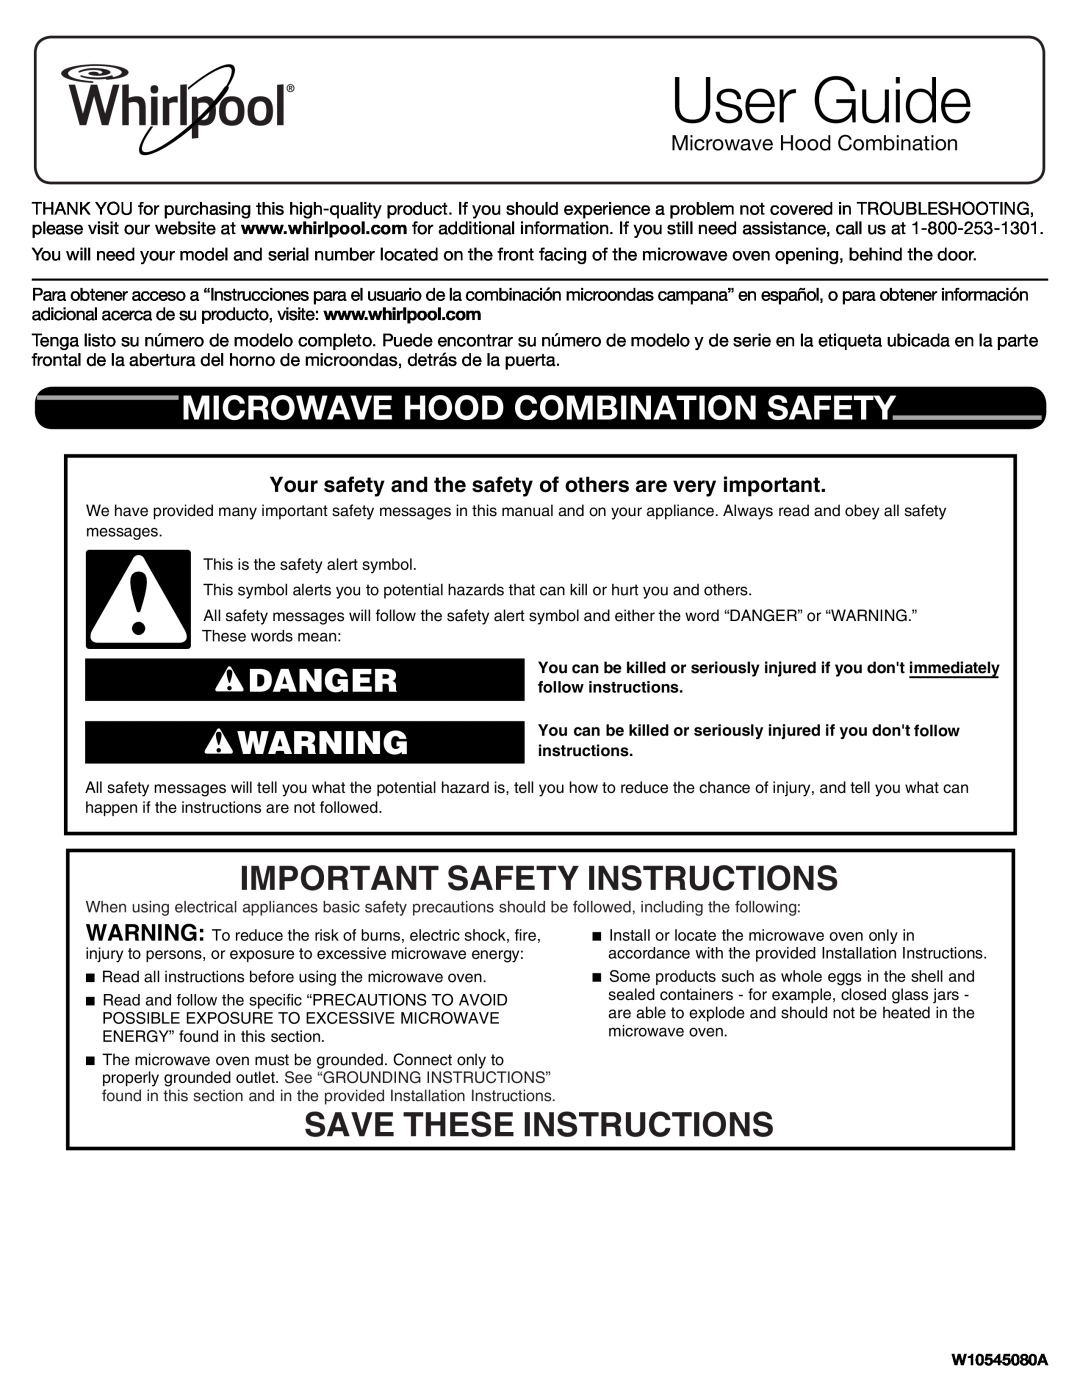 Whirlpool W10545080A important safety instructions Microwave Hood Combination Safety, Important Safety Instructions 